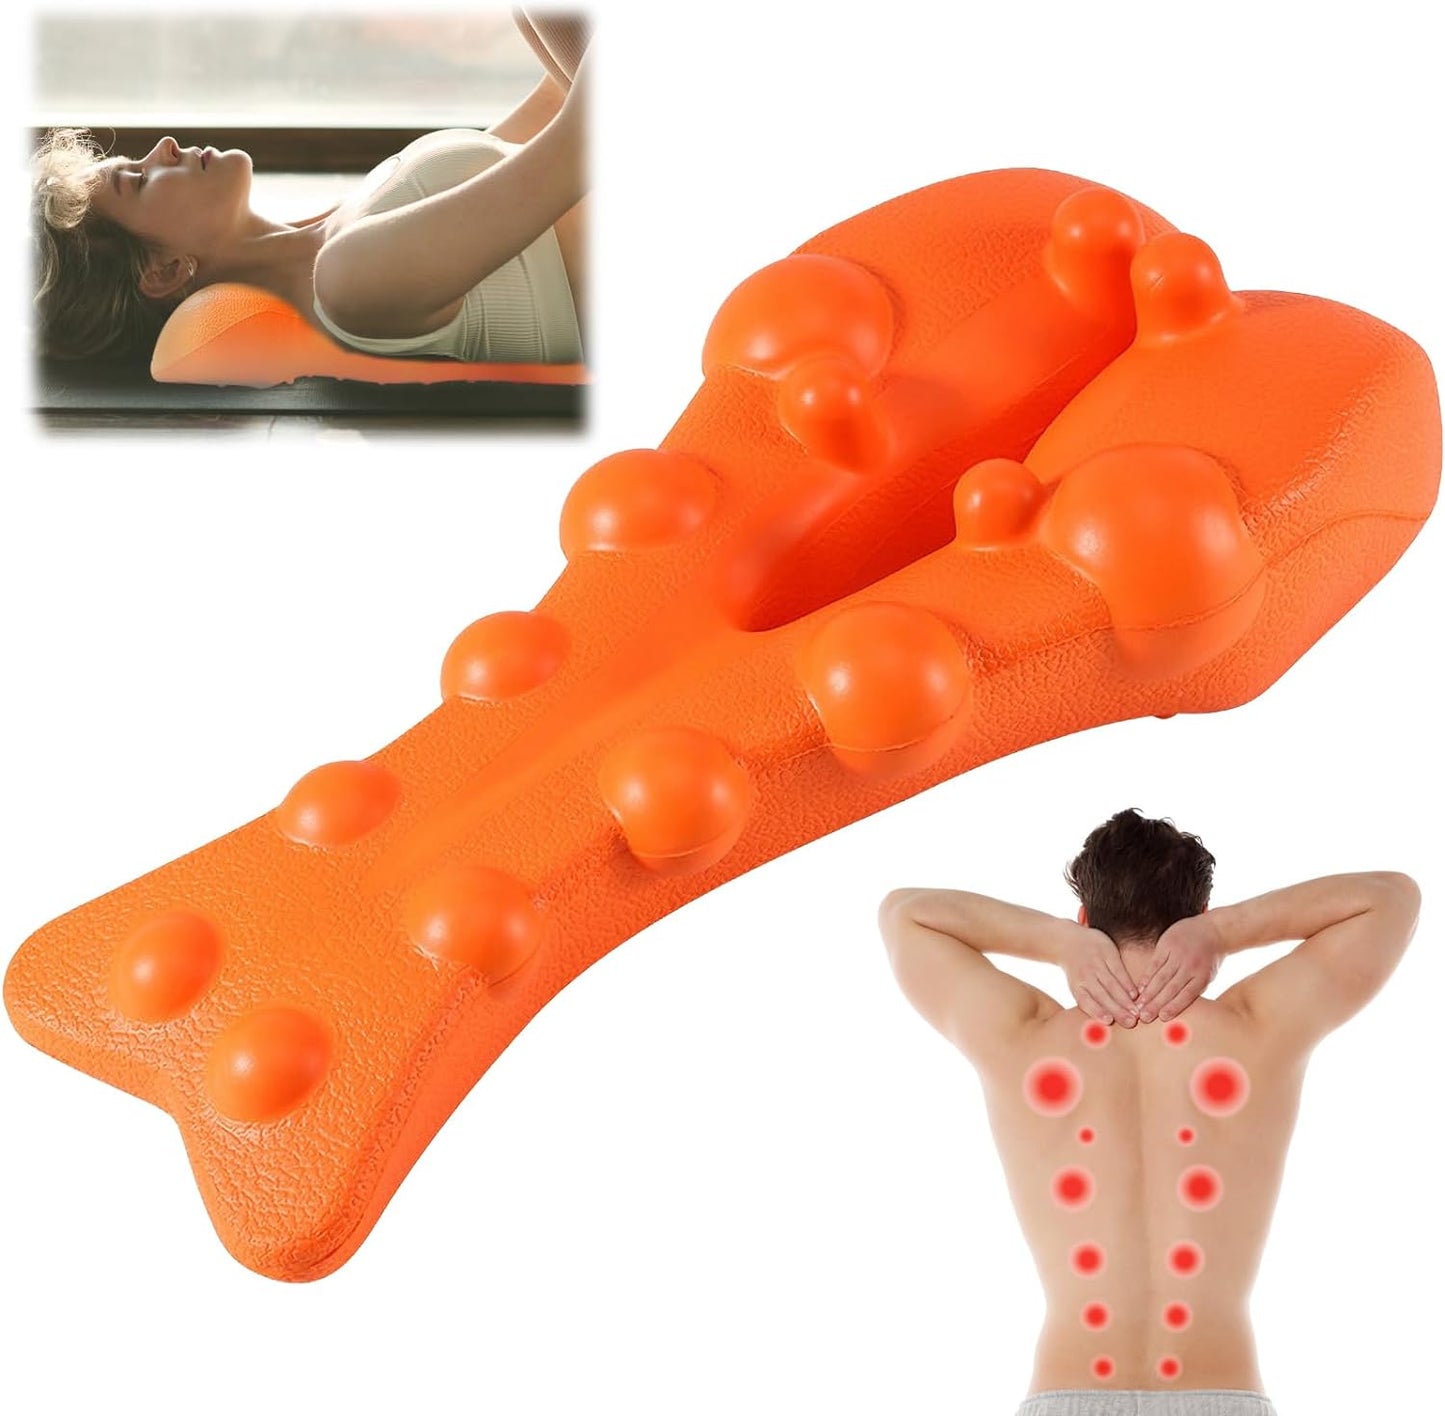 Acupressure Relaxer for Neck, Upper Back, and Shoulders Tool